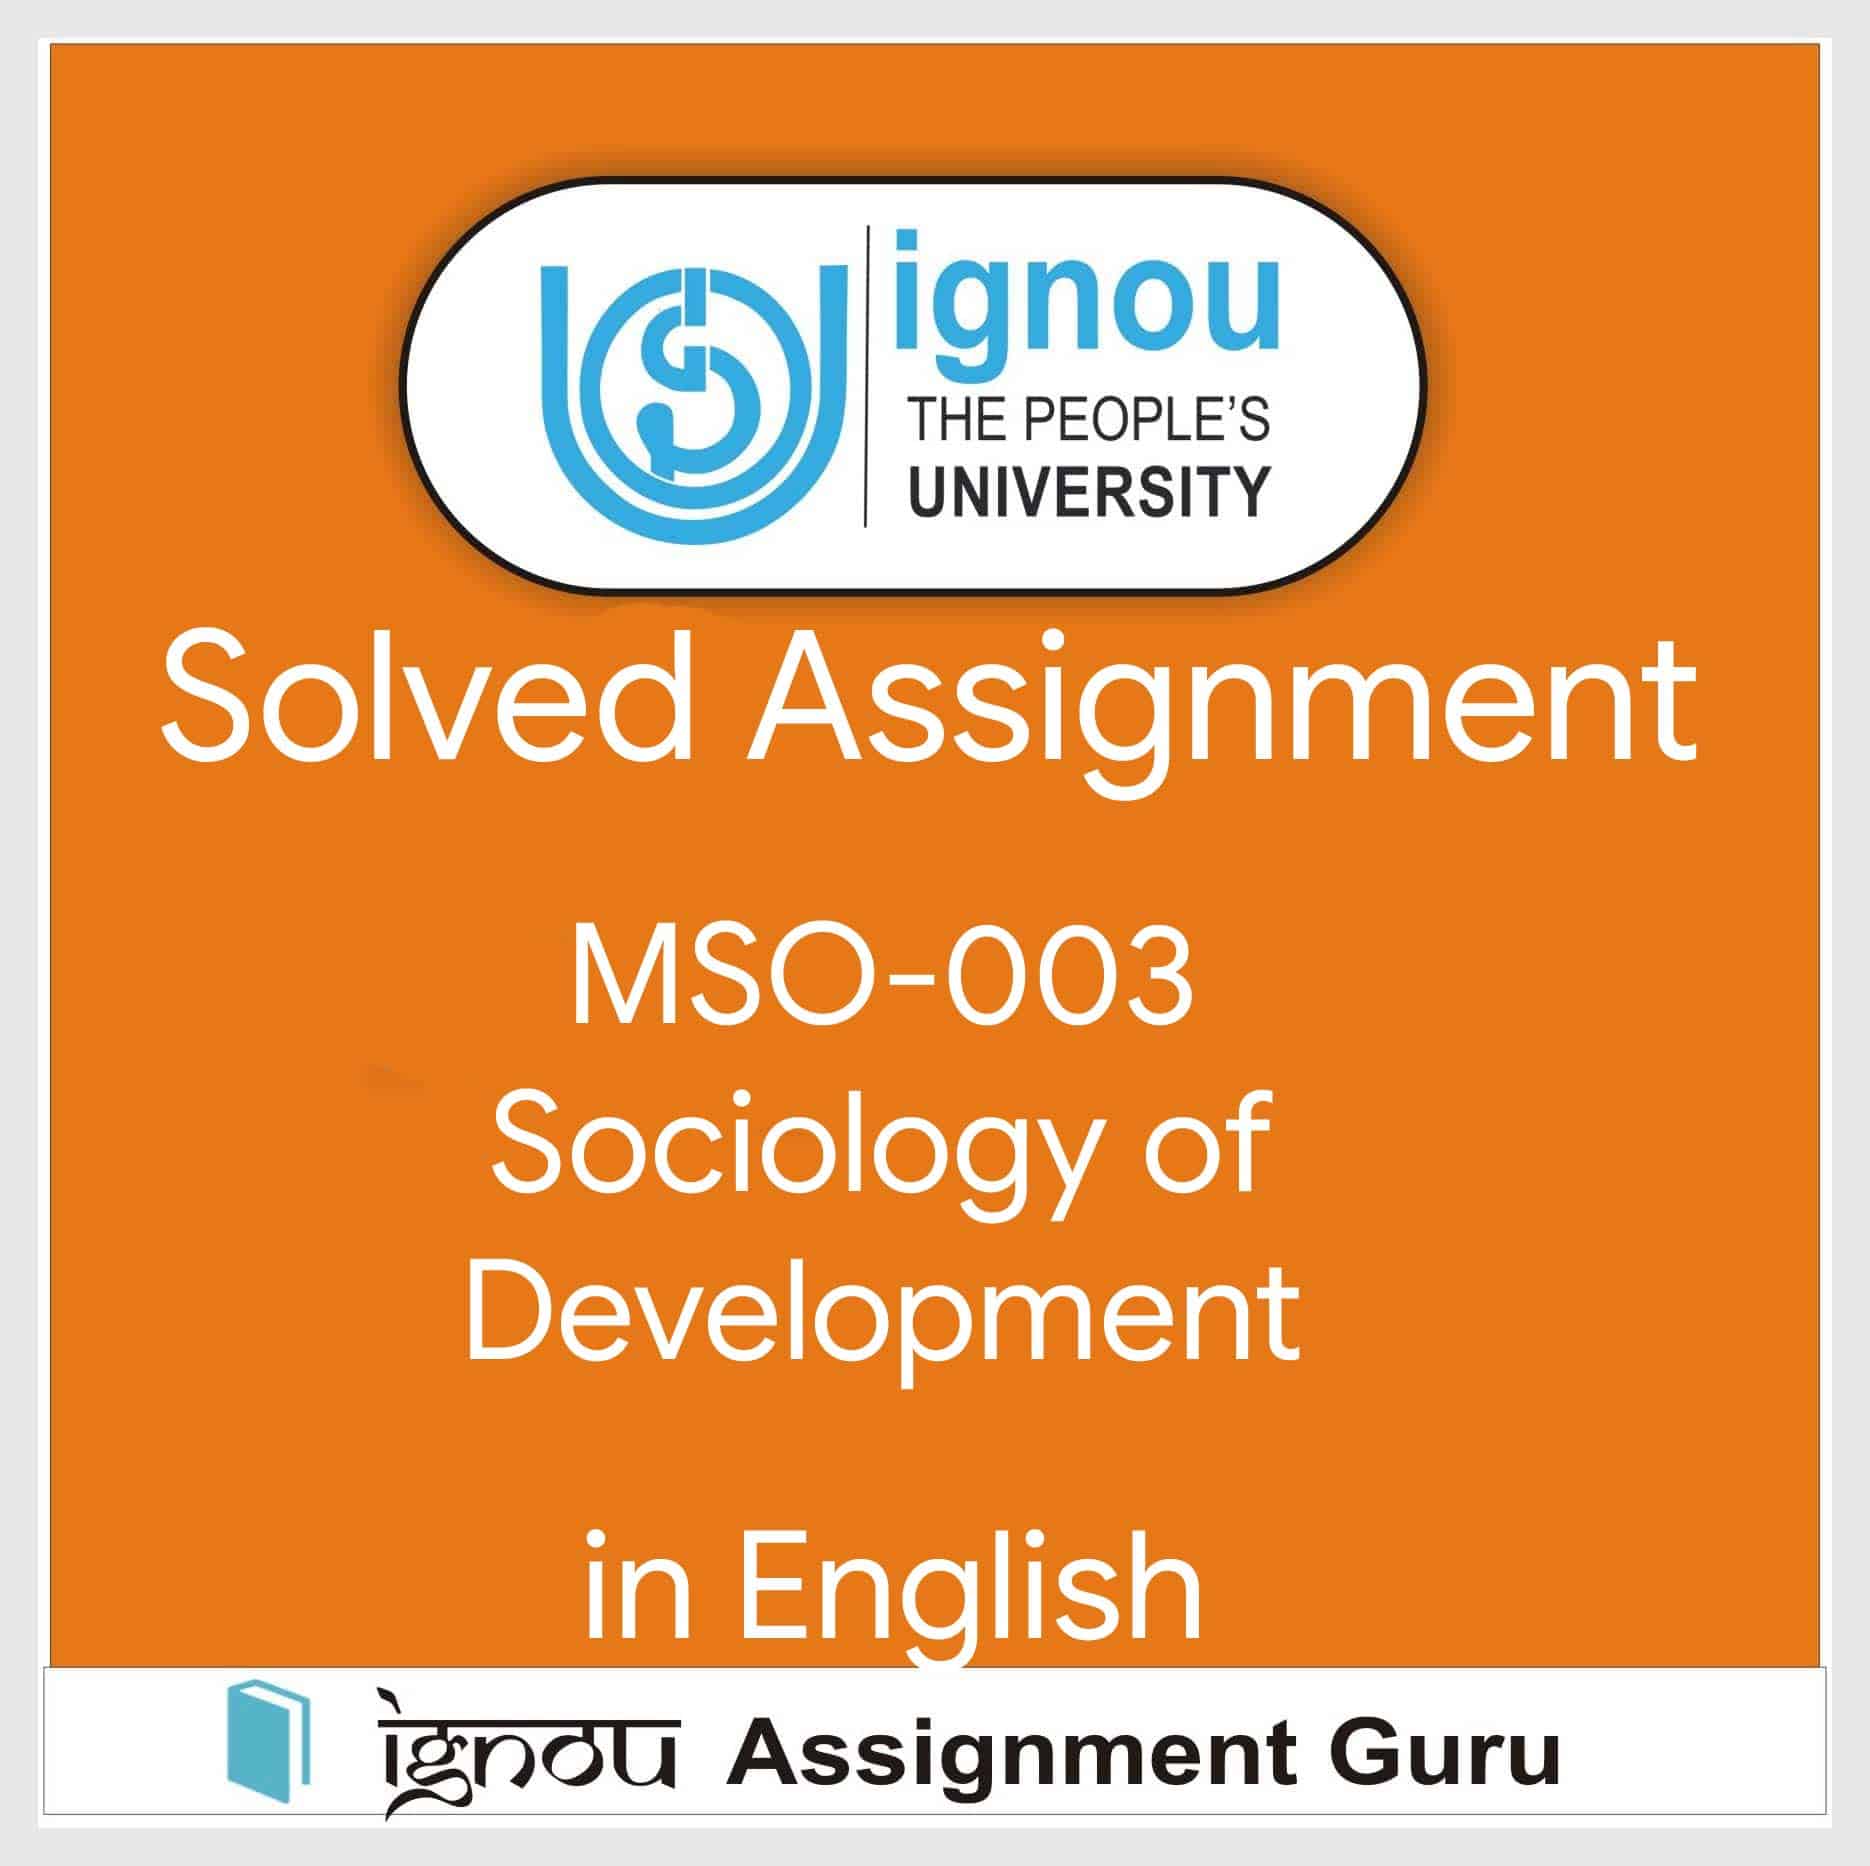 mso 003 solved assignment